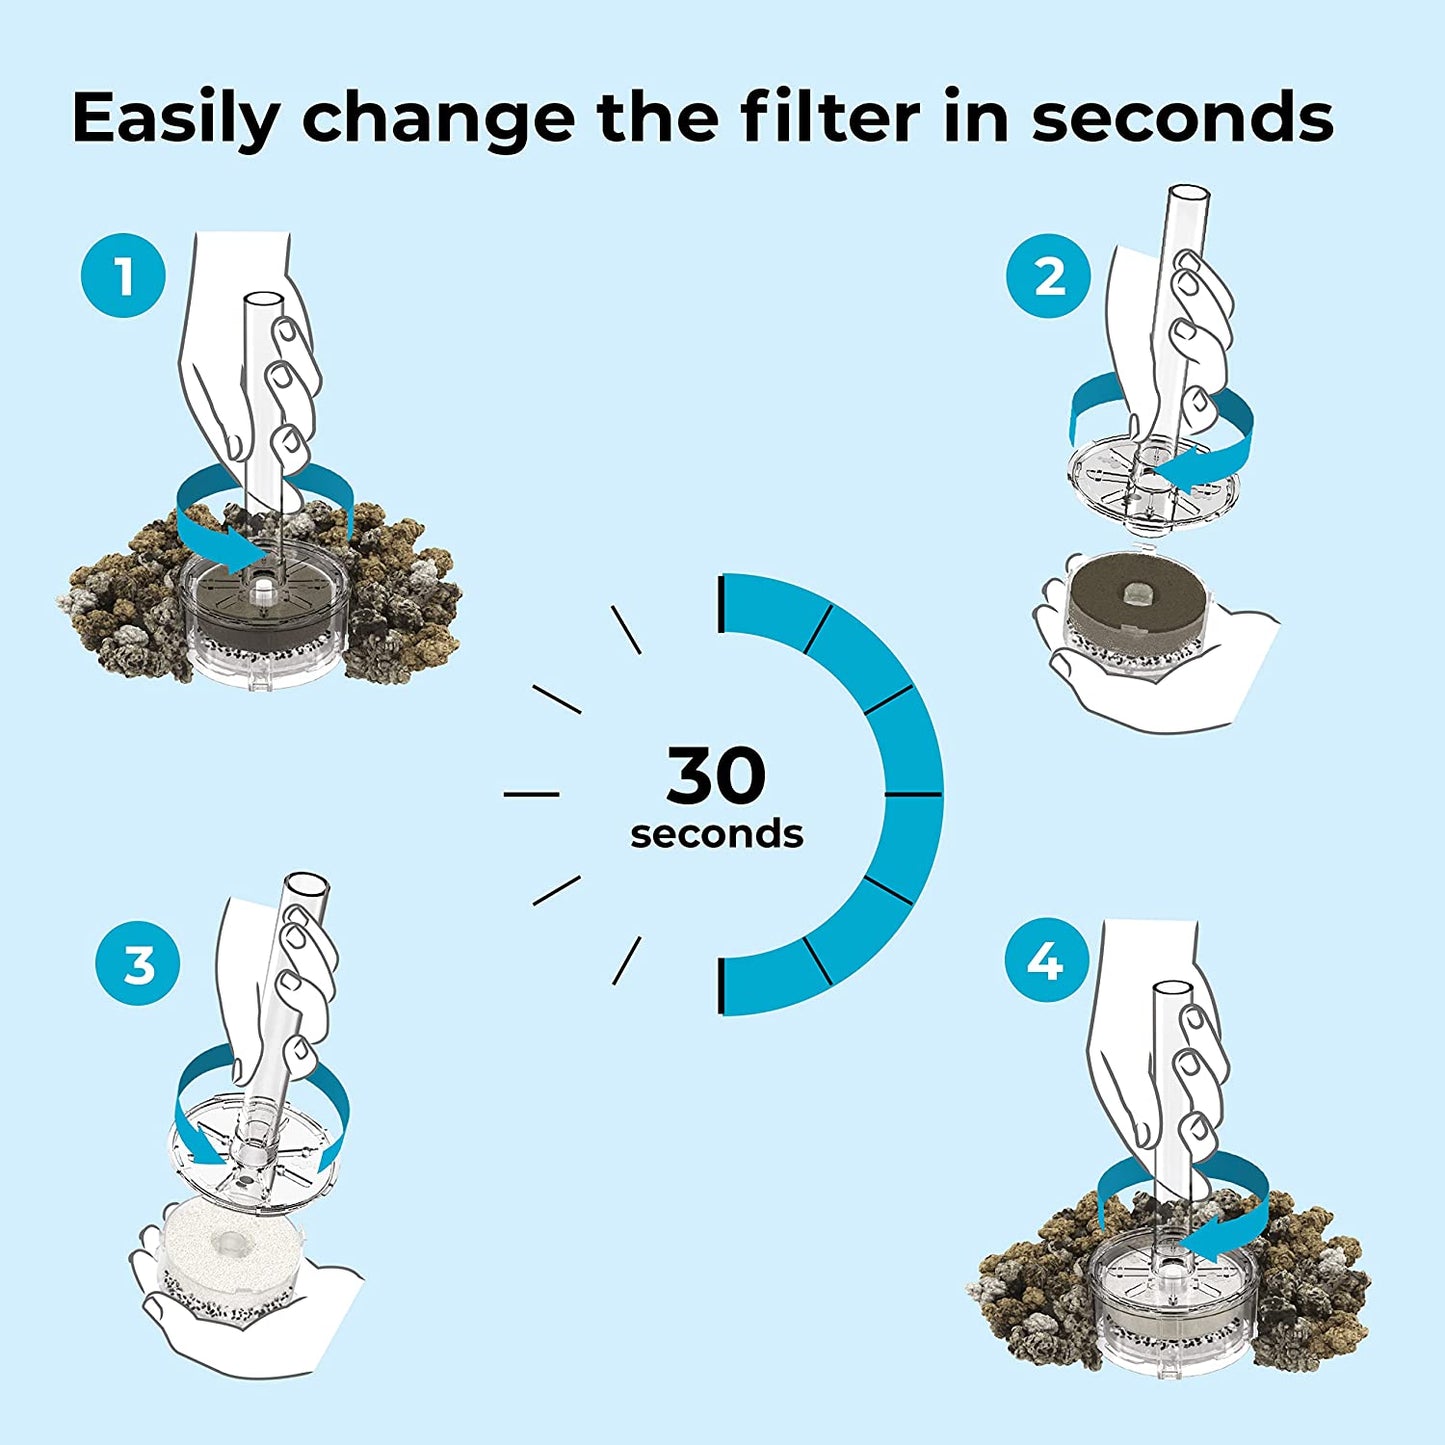 Instructions on how to change the filter in a biOrd aquarium. There is text which reads, "Easily change the filter in seconds."